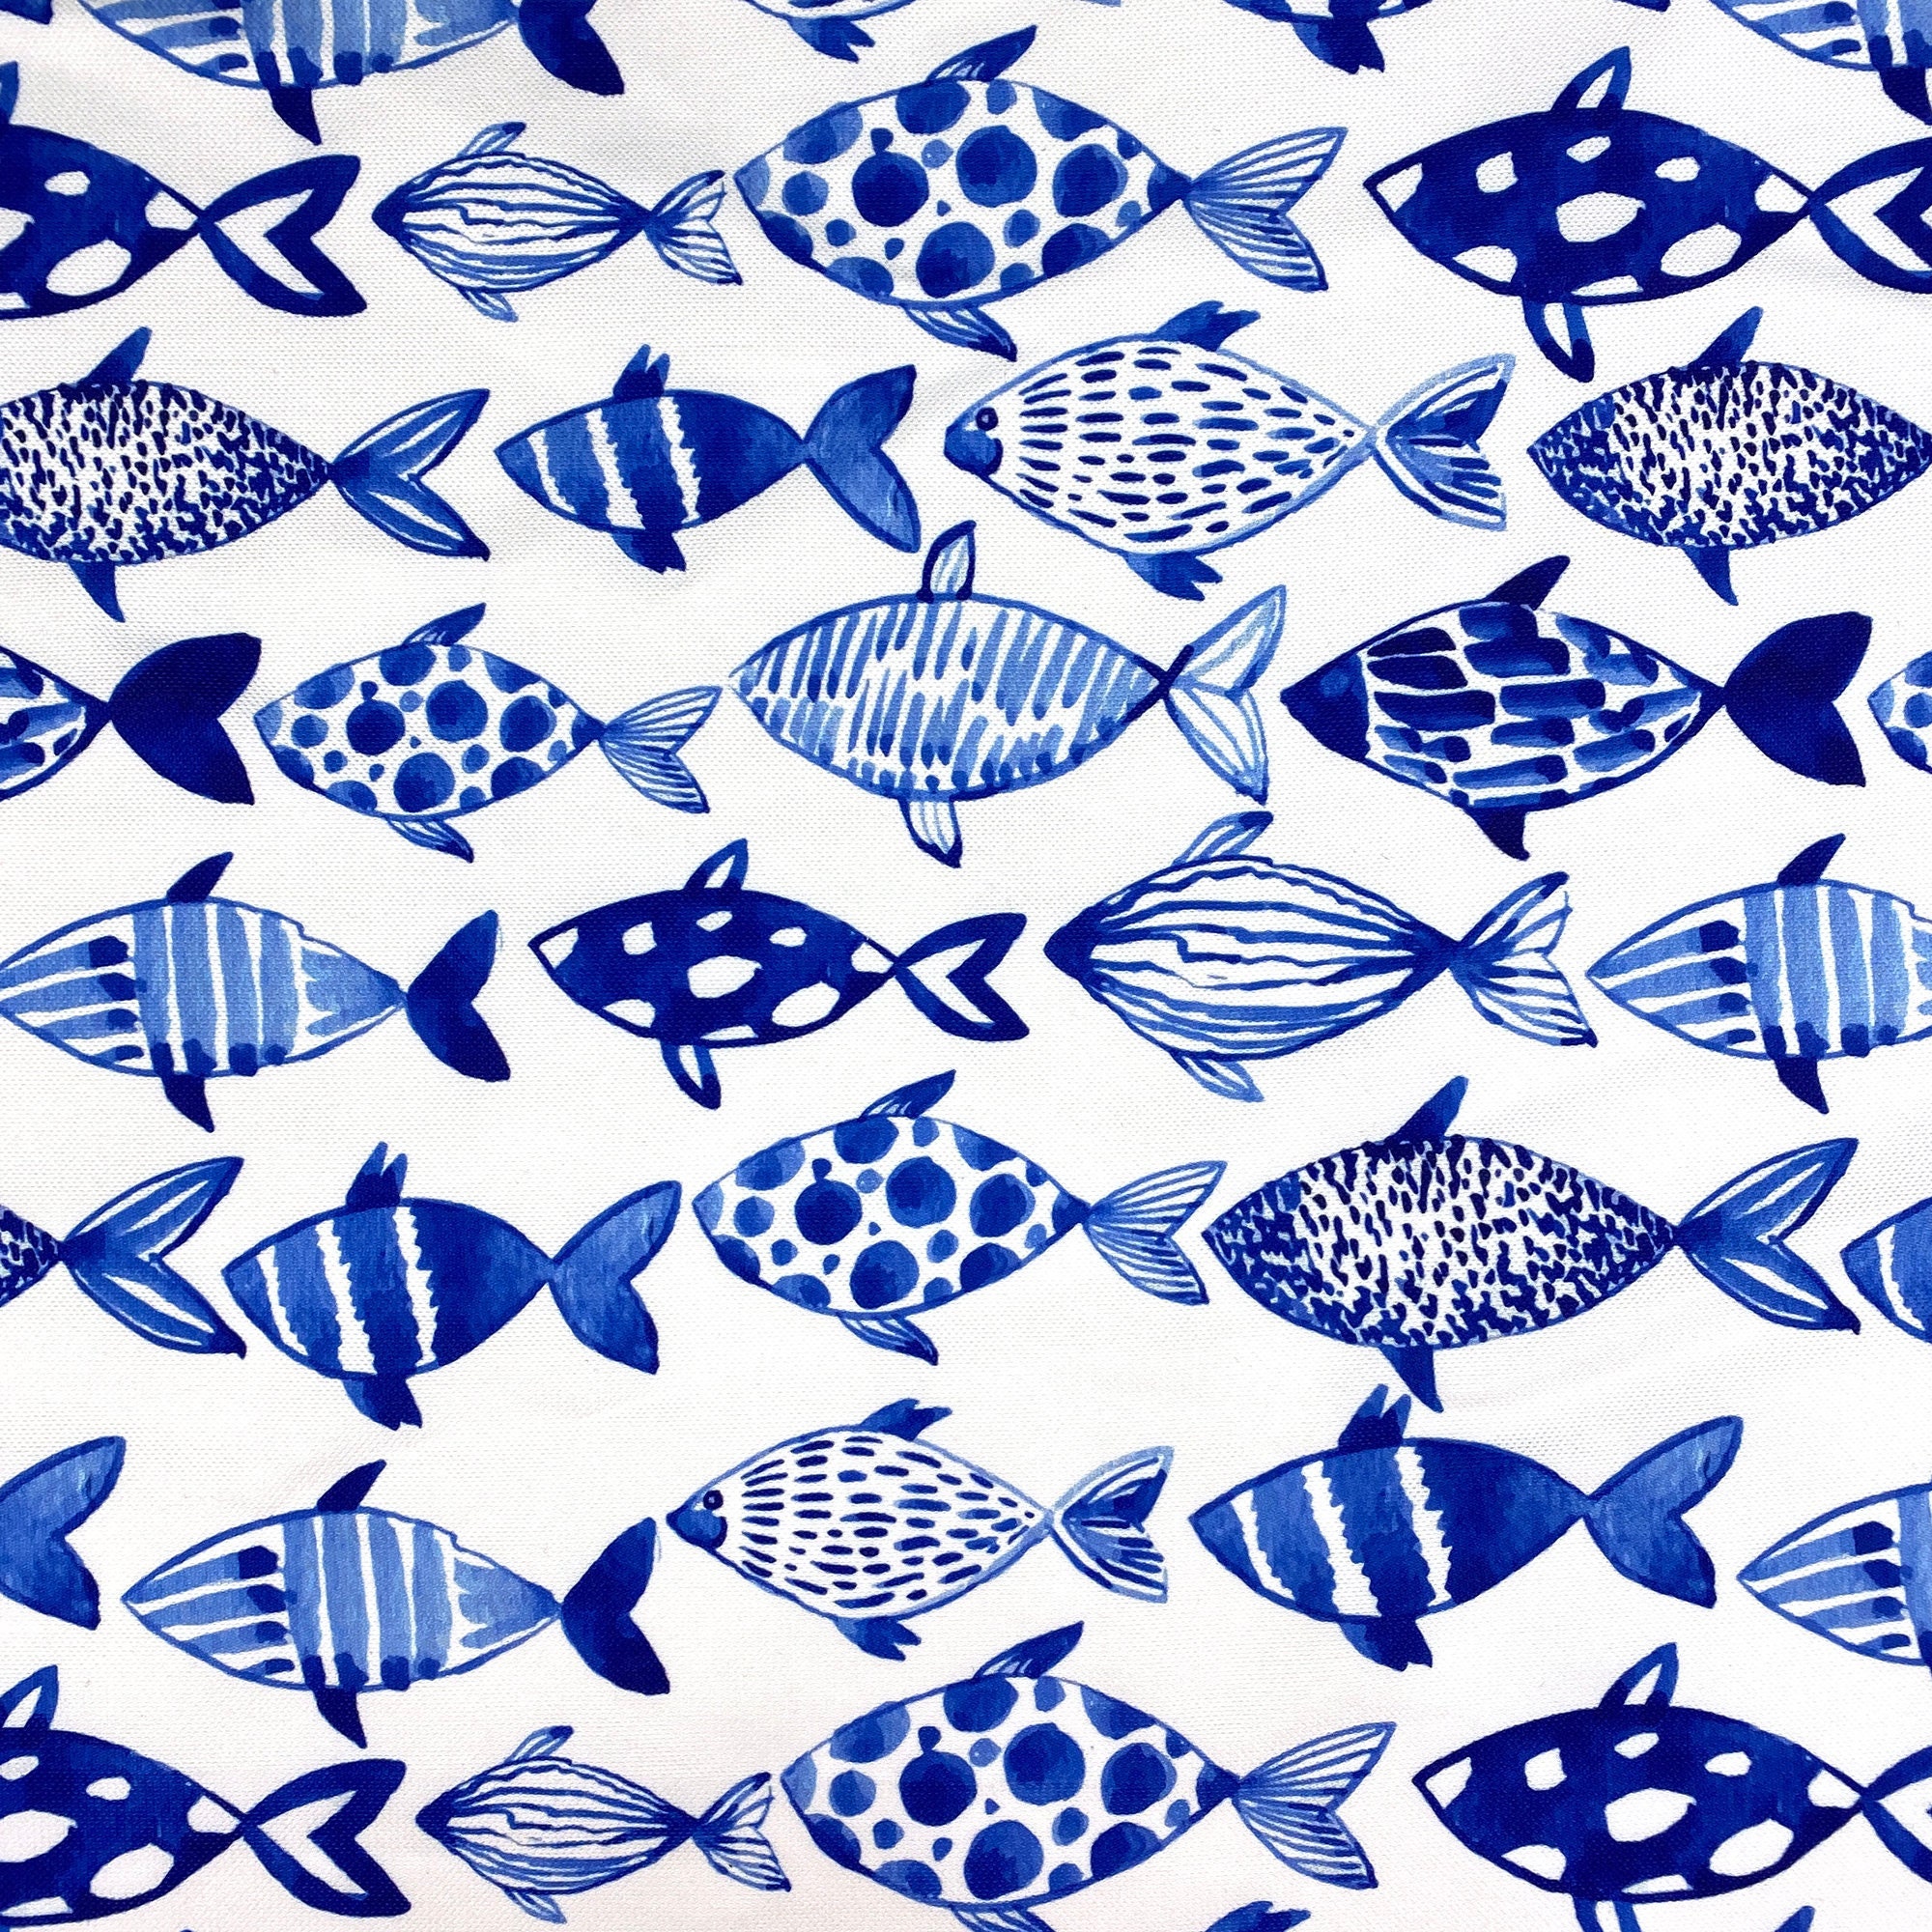 Blue White Fish Fabric Nautical Coastal Abstract Fish Print Home Decor  Upholstery Material Curtain Furniture Chair Sofa Fabric by the Yard 